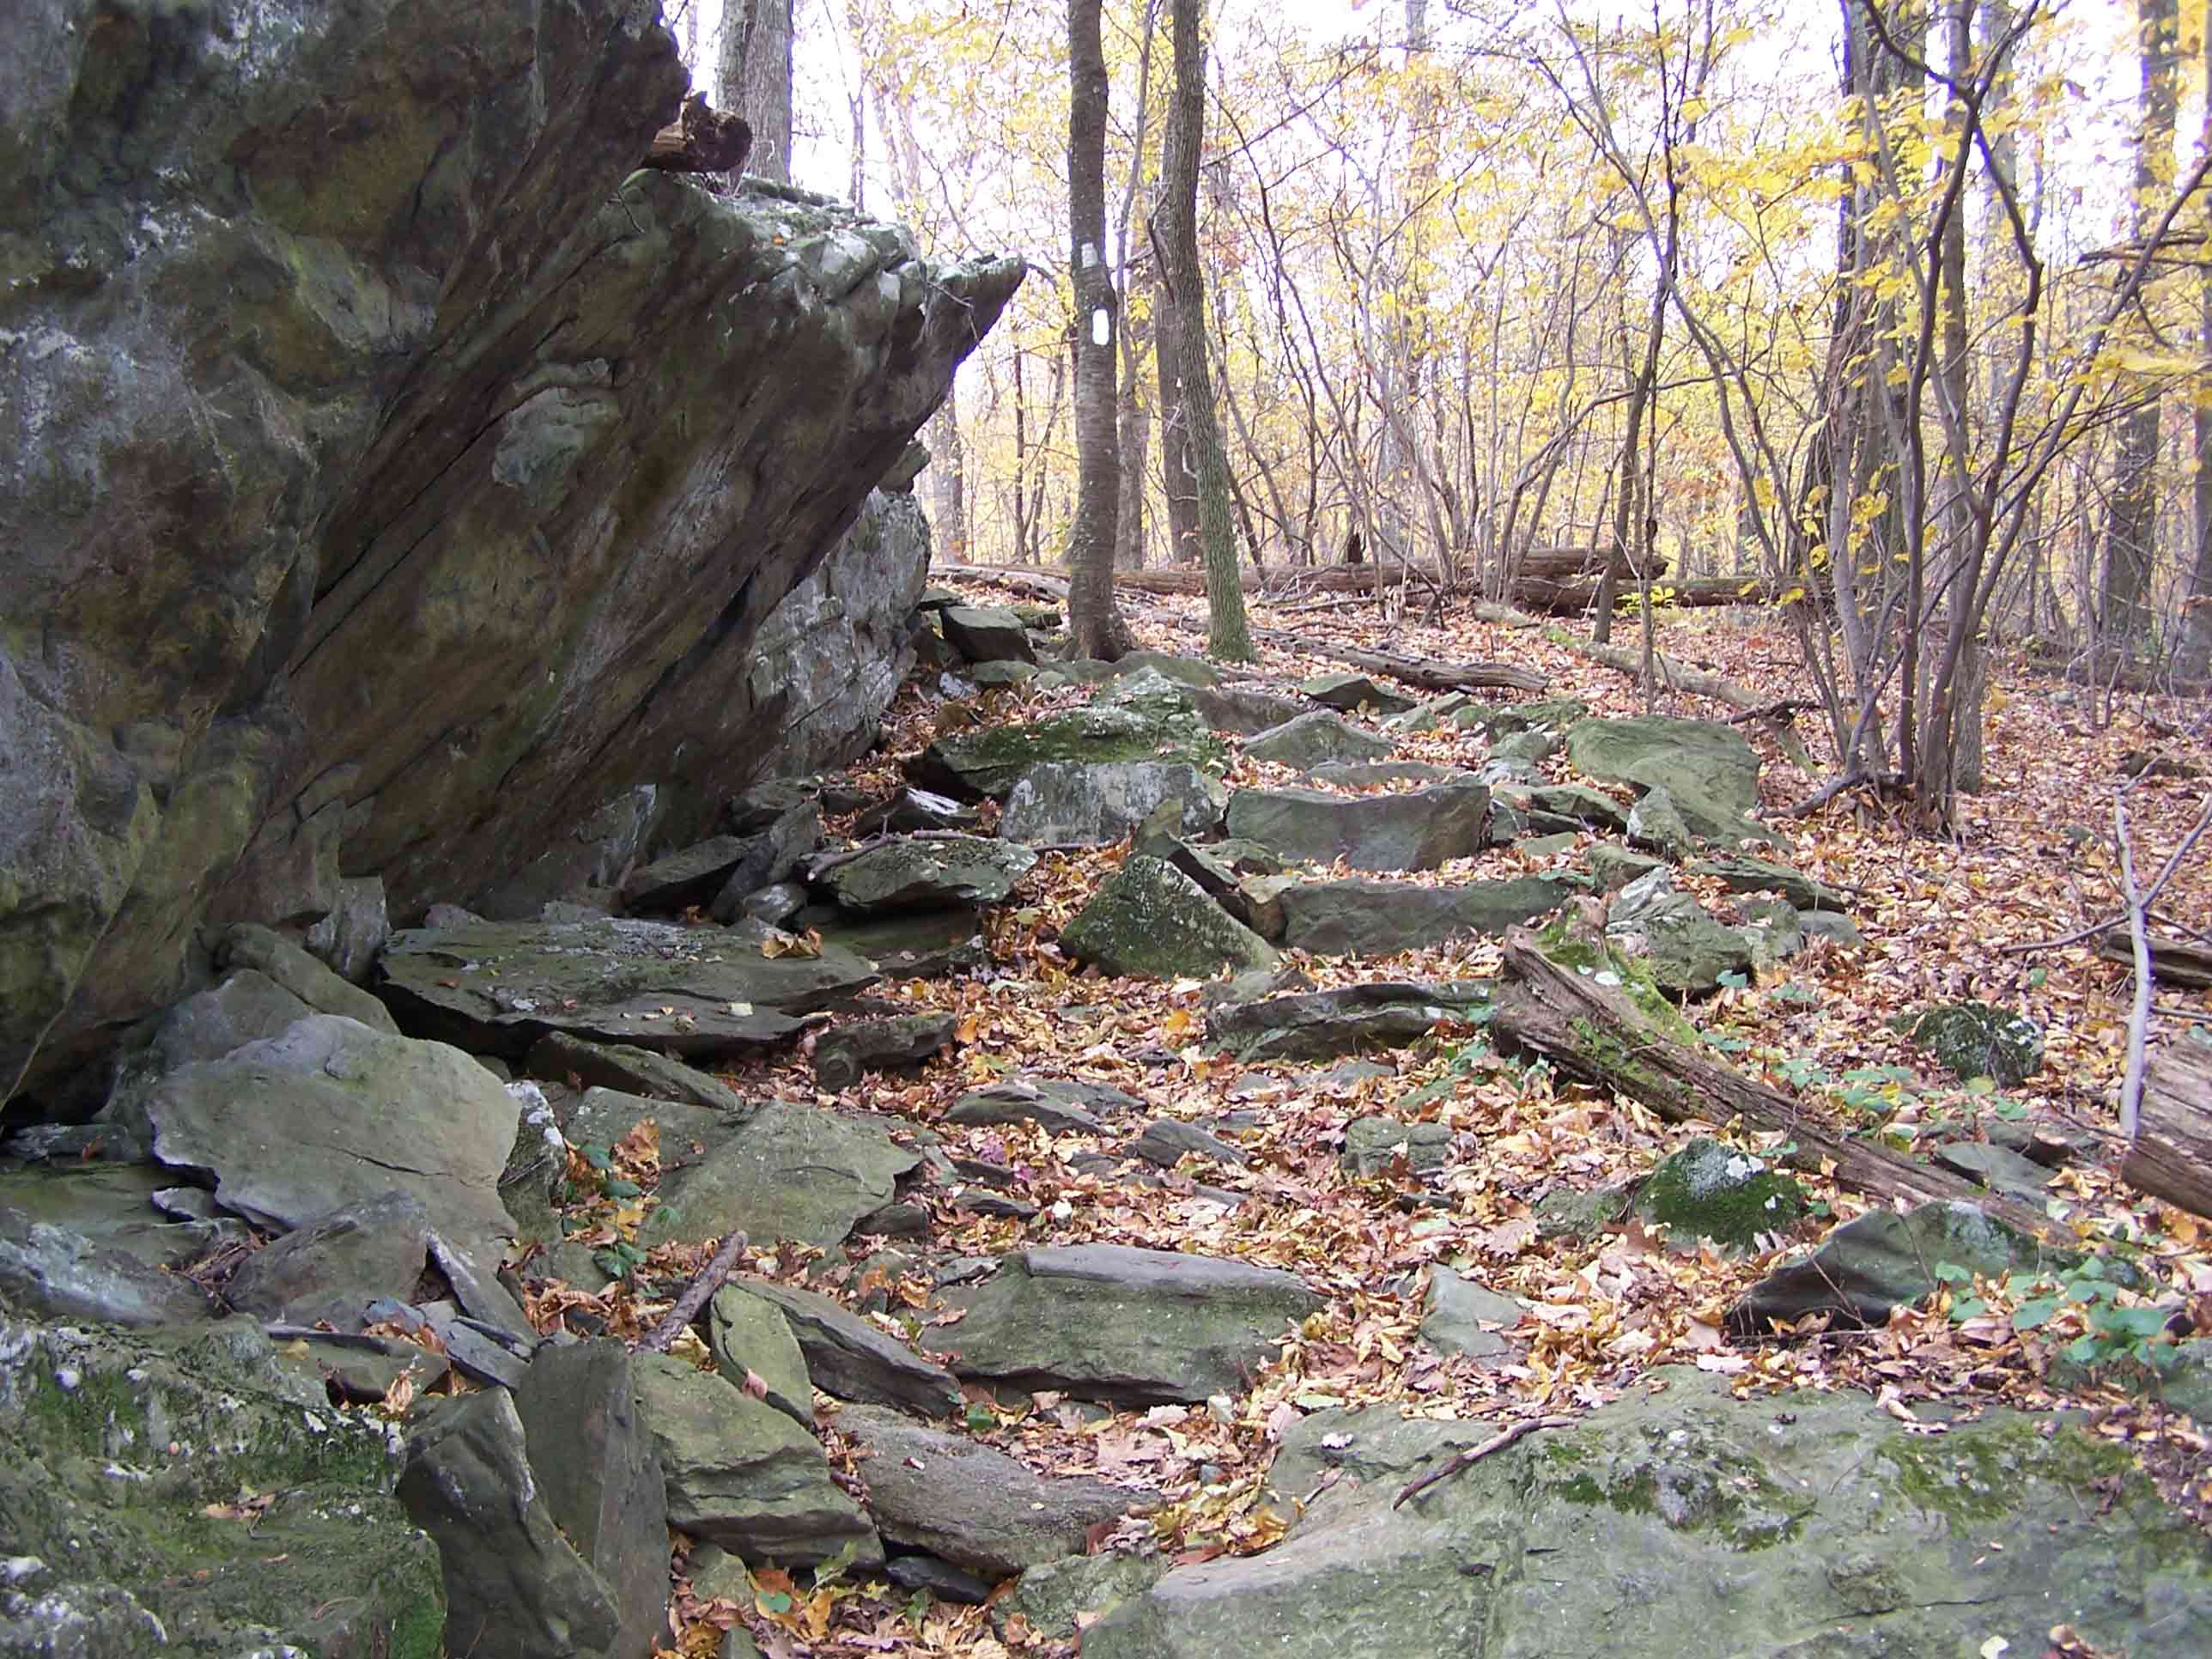 mm 1.9 Rock steps next to large boulders. Courtesy at@rohland.org